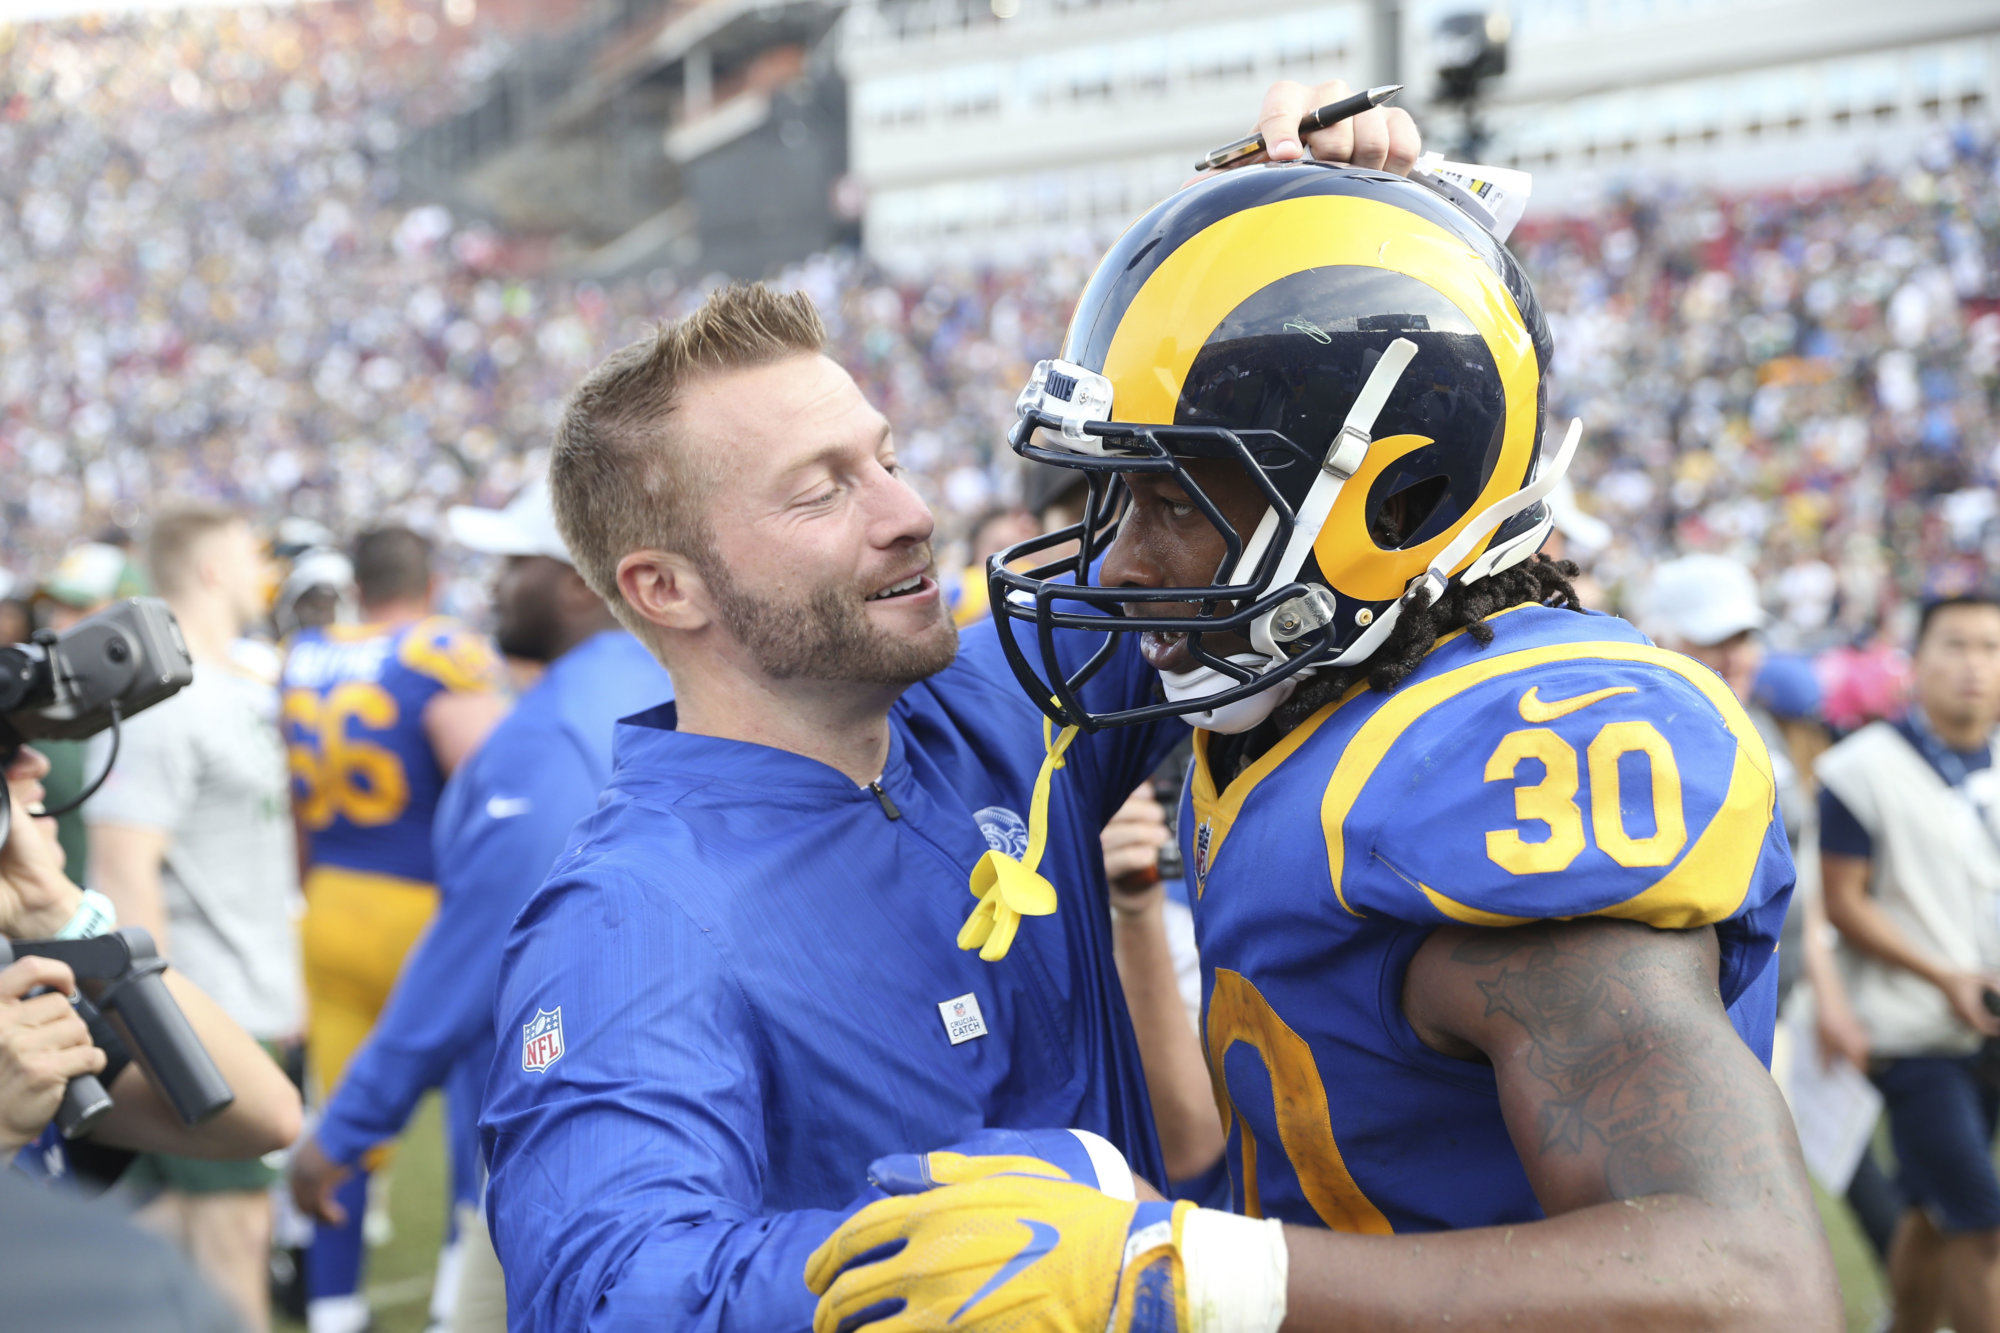 Los Angeles Rams running back Todd Gurley (30) gets a hug after the game from Los Angeles Rams head coach Sean McVay of an NFL football game, Sunday, Oct. 28, 2018, in Los Angeles. (AP Photo/Peter Joneleit)